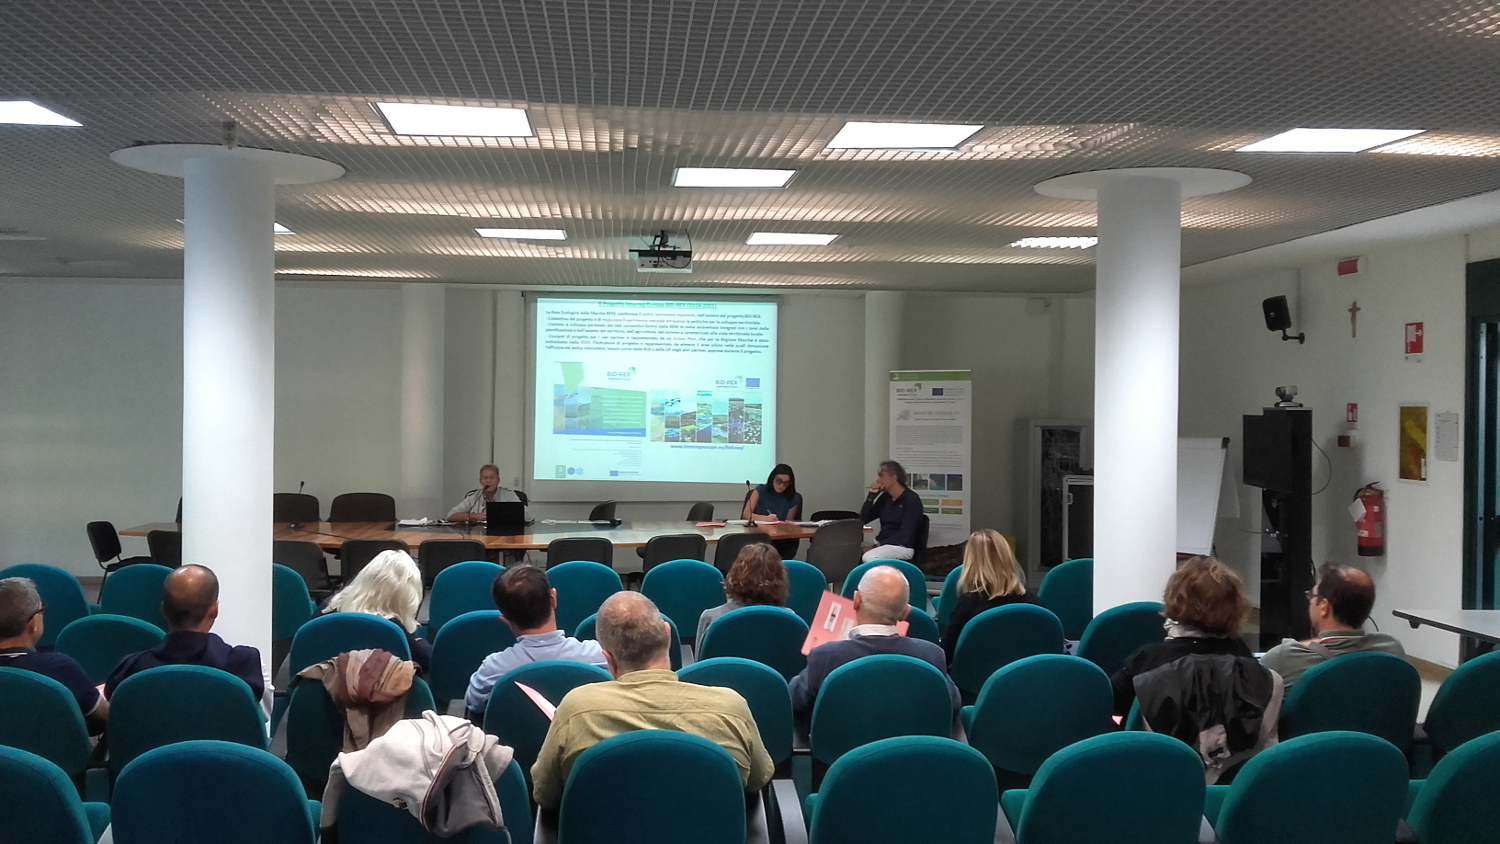 Marche hosts stakeholder meeting